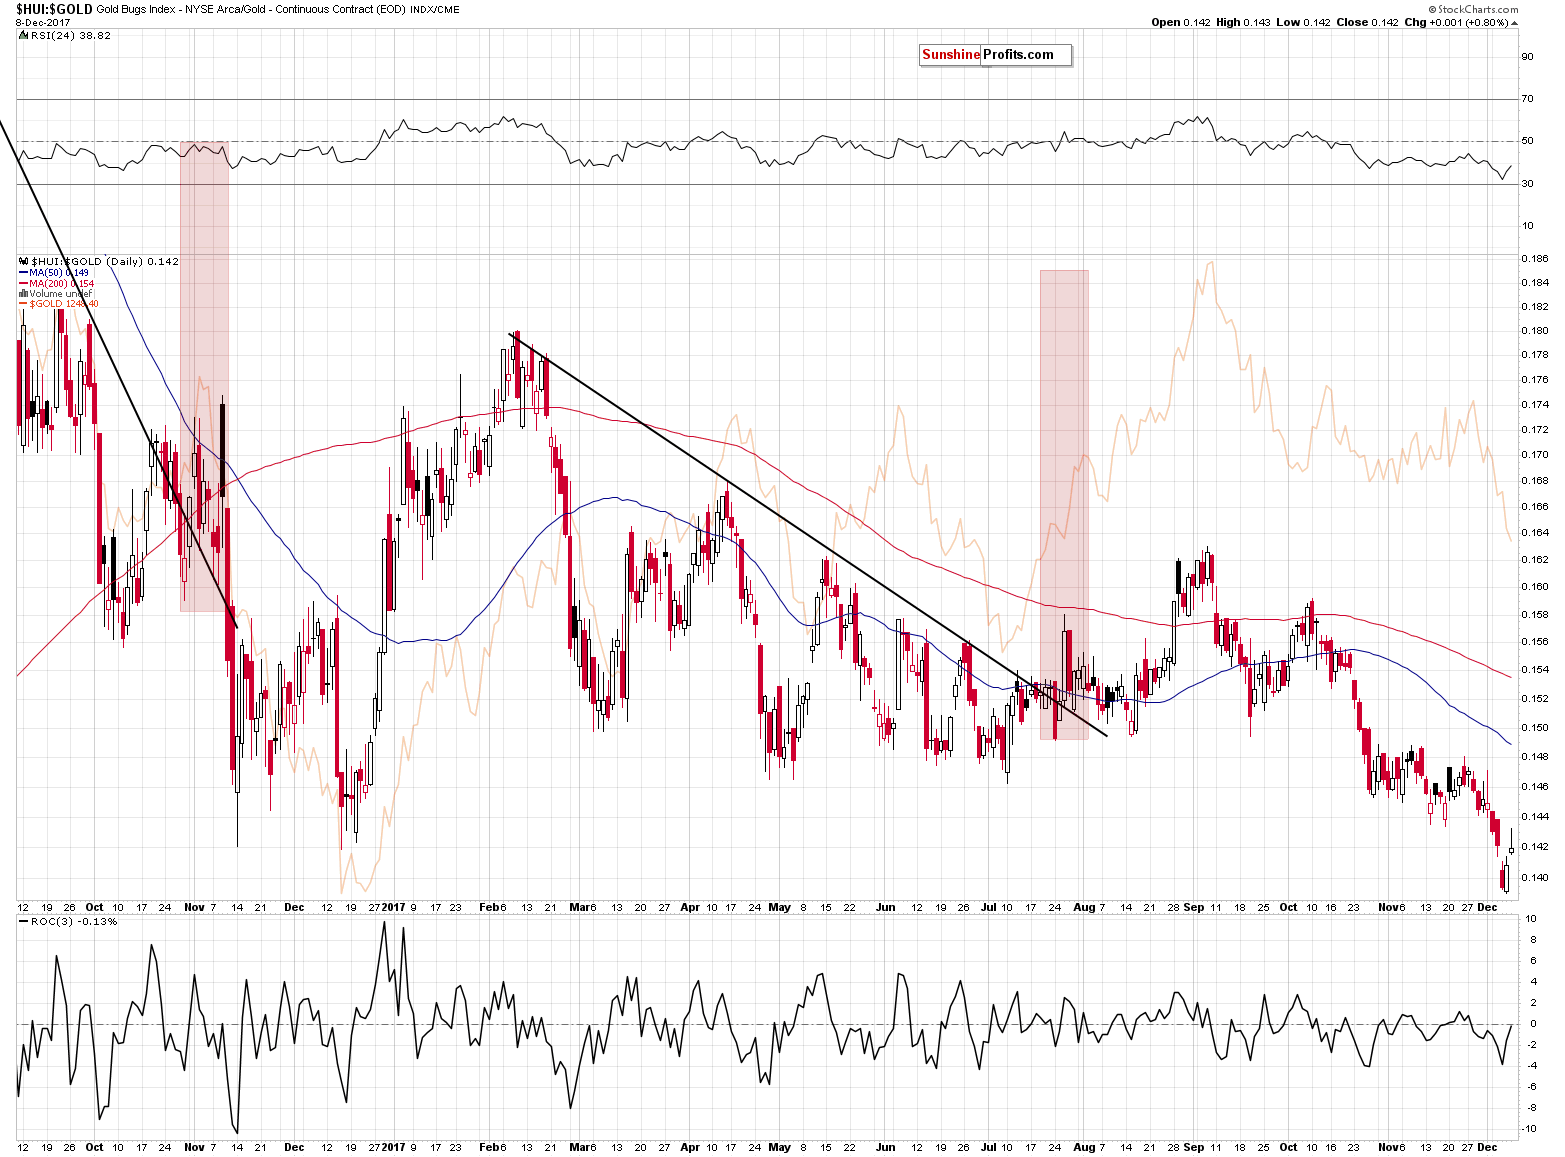 HUI:GOLD - Gold stocks to Gold ratio chart